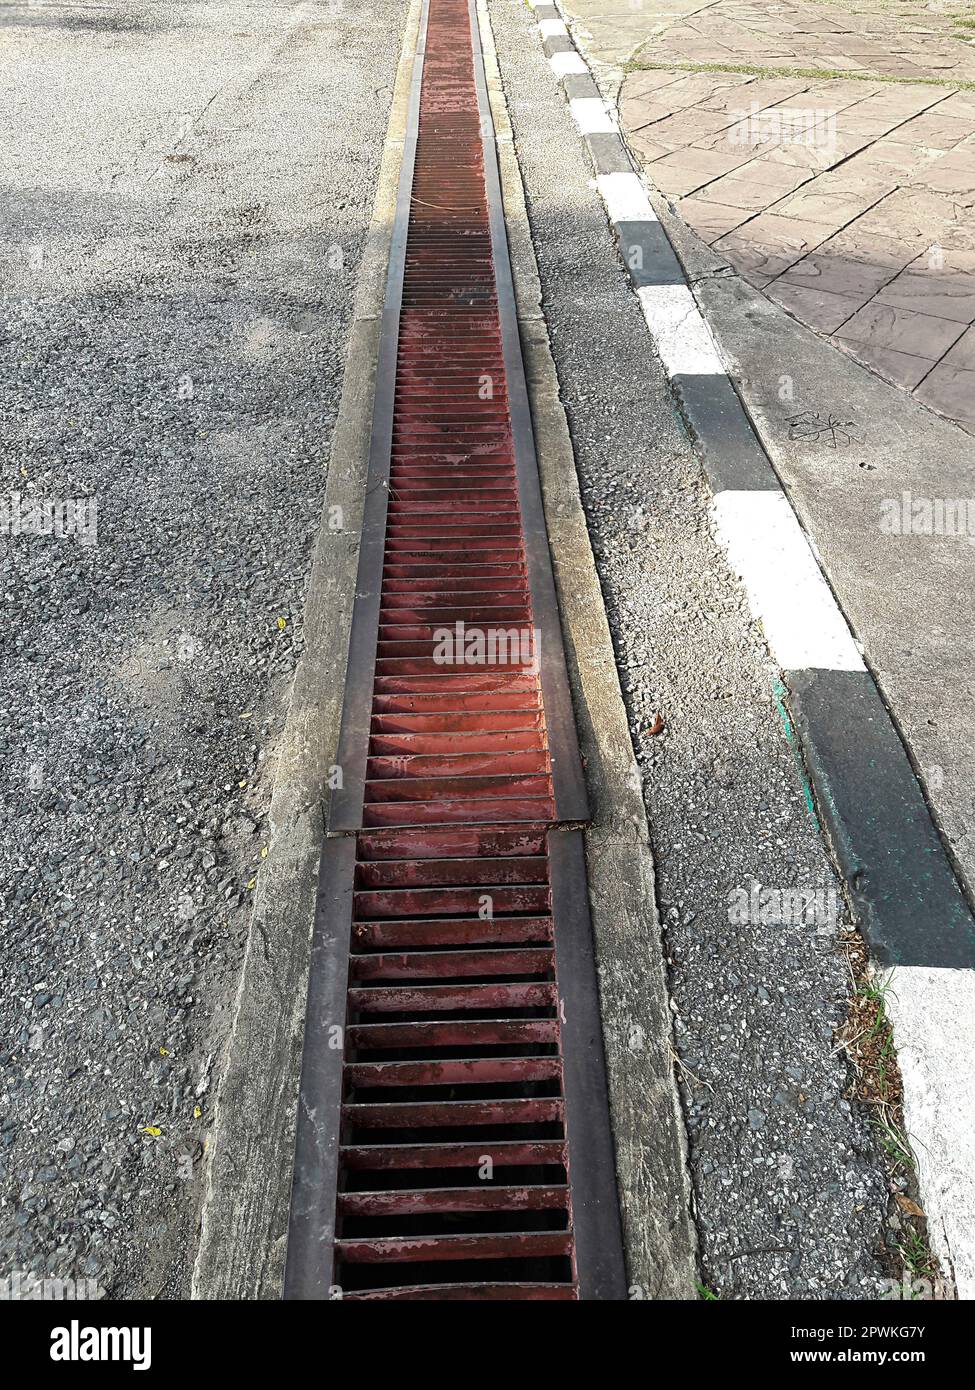 water drain or ditch on the road. Gutters drain grate, drain cover. Road drains - sewer cover. iron grate of water drain on the road in every city. Wa Stock Photo